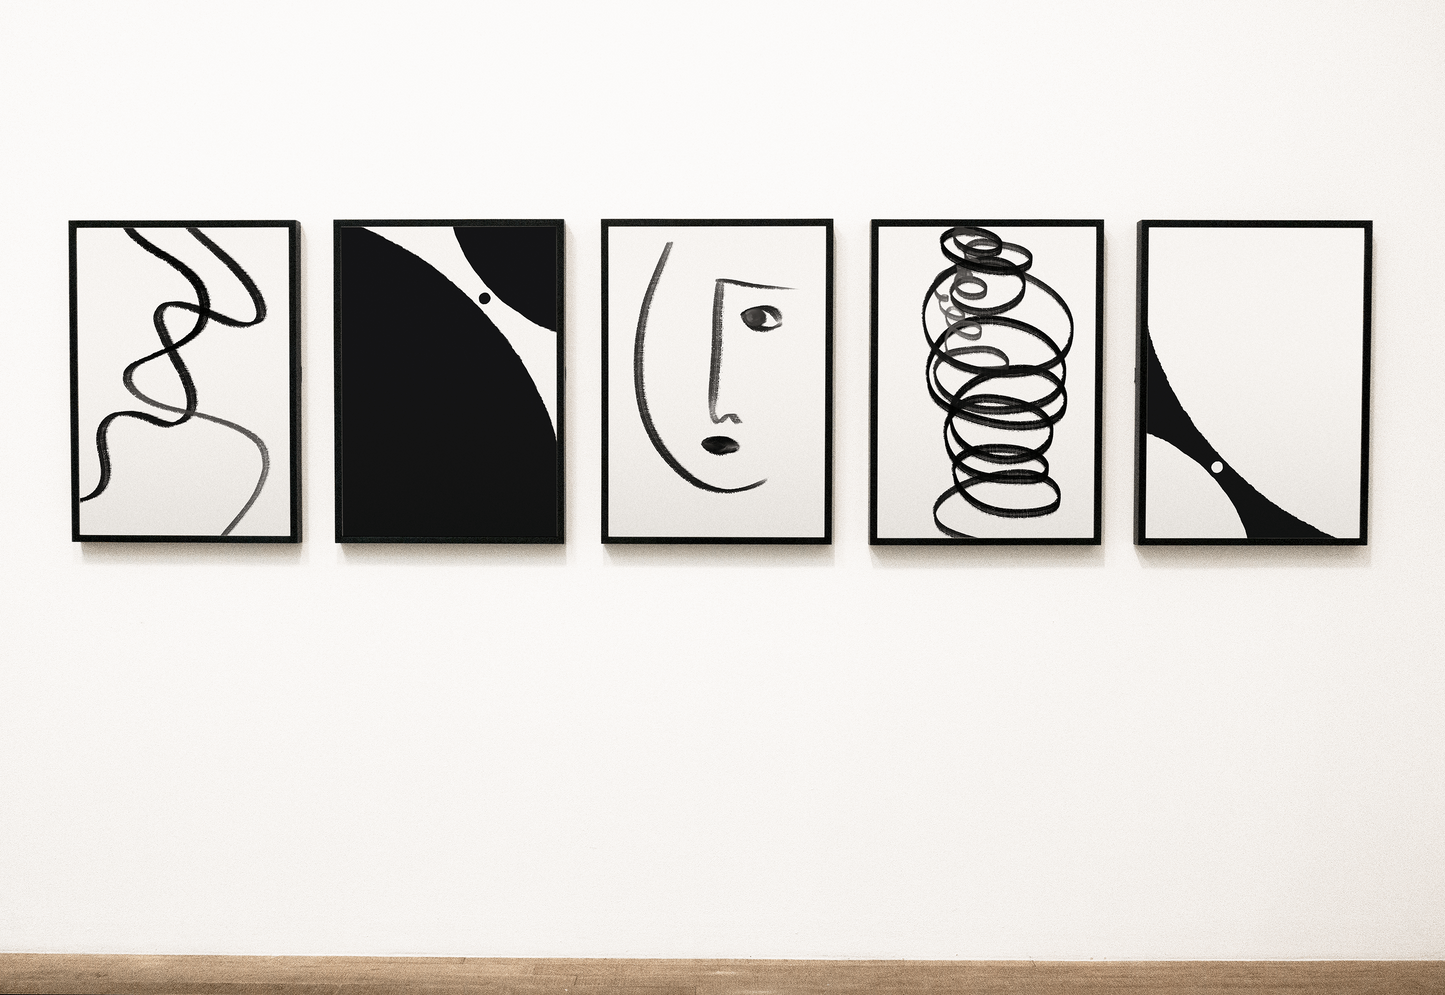 Gallery wall featuring a series of five framed abstract black and white artworks, with various geometric and organic shapes creating a cohesive modern art collection.